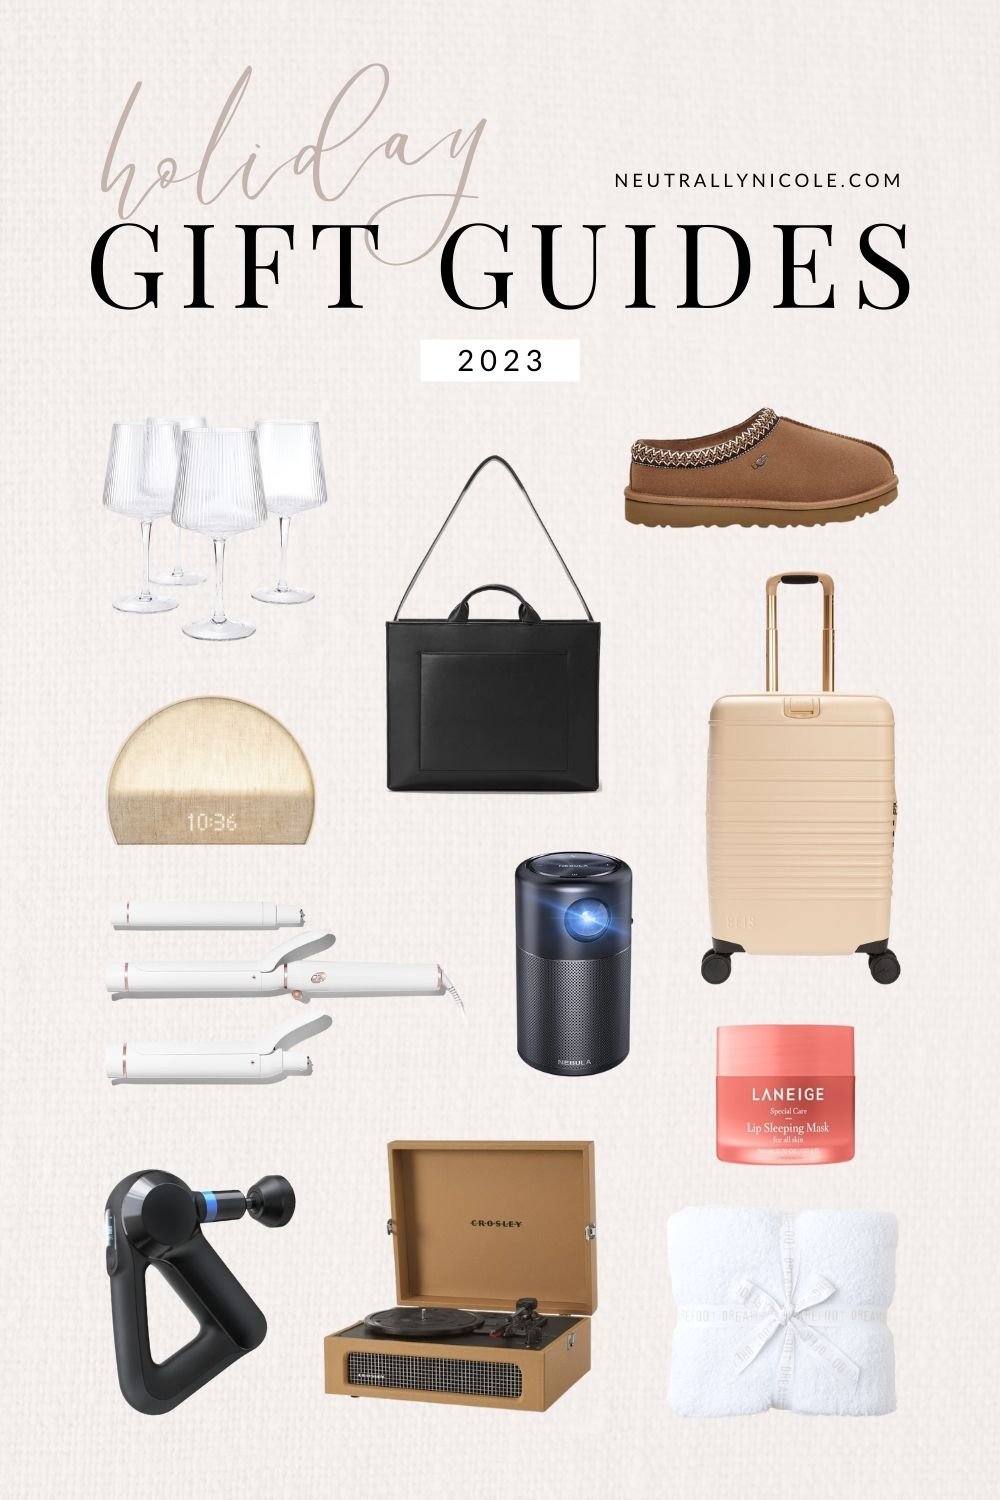 9 Simple Steps to Create and Promote a Holiday Gift Guide in 2023